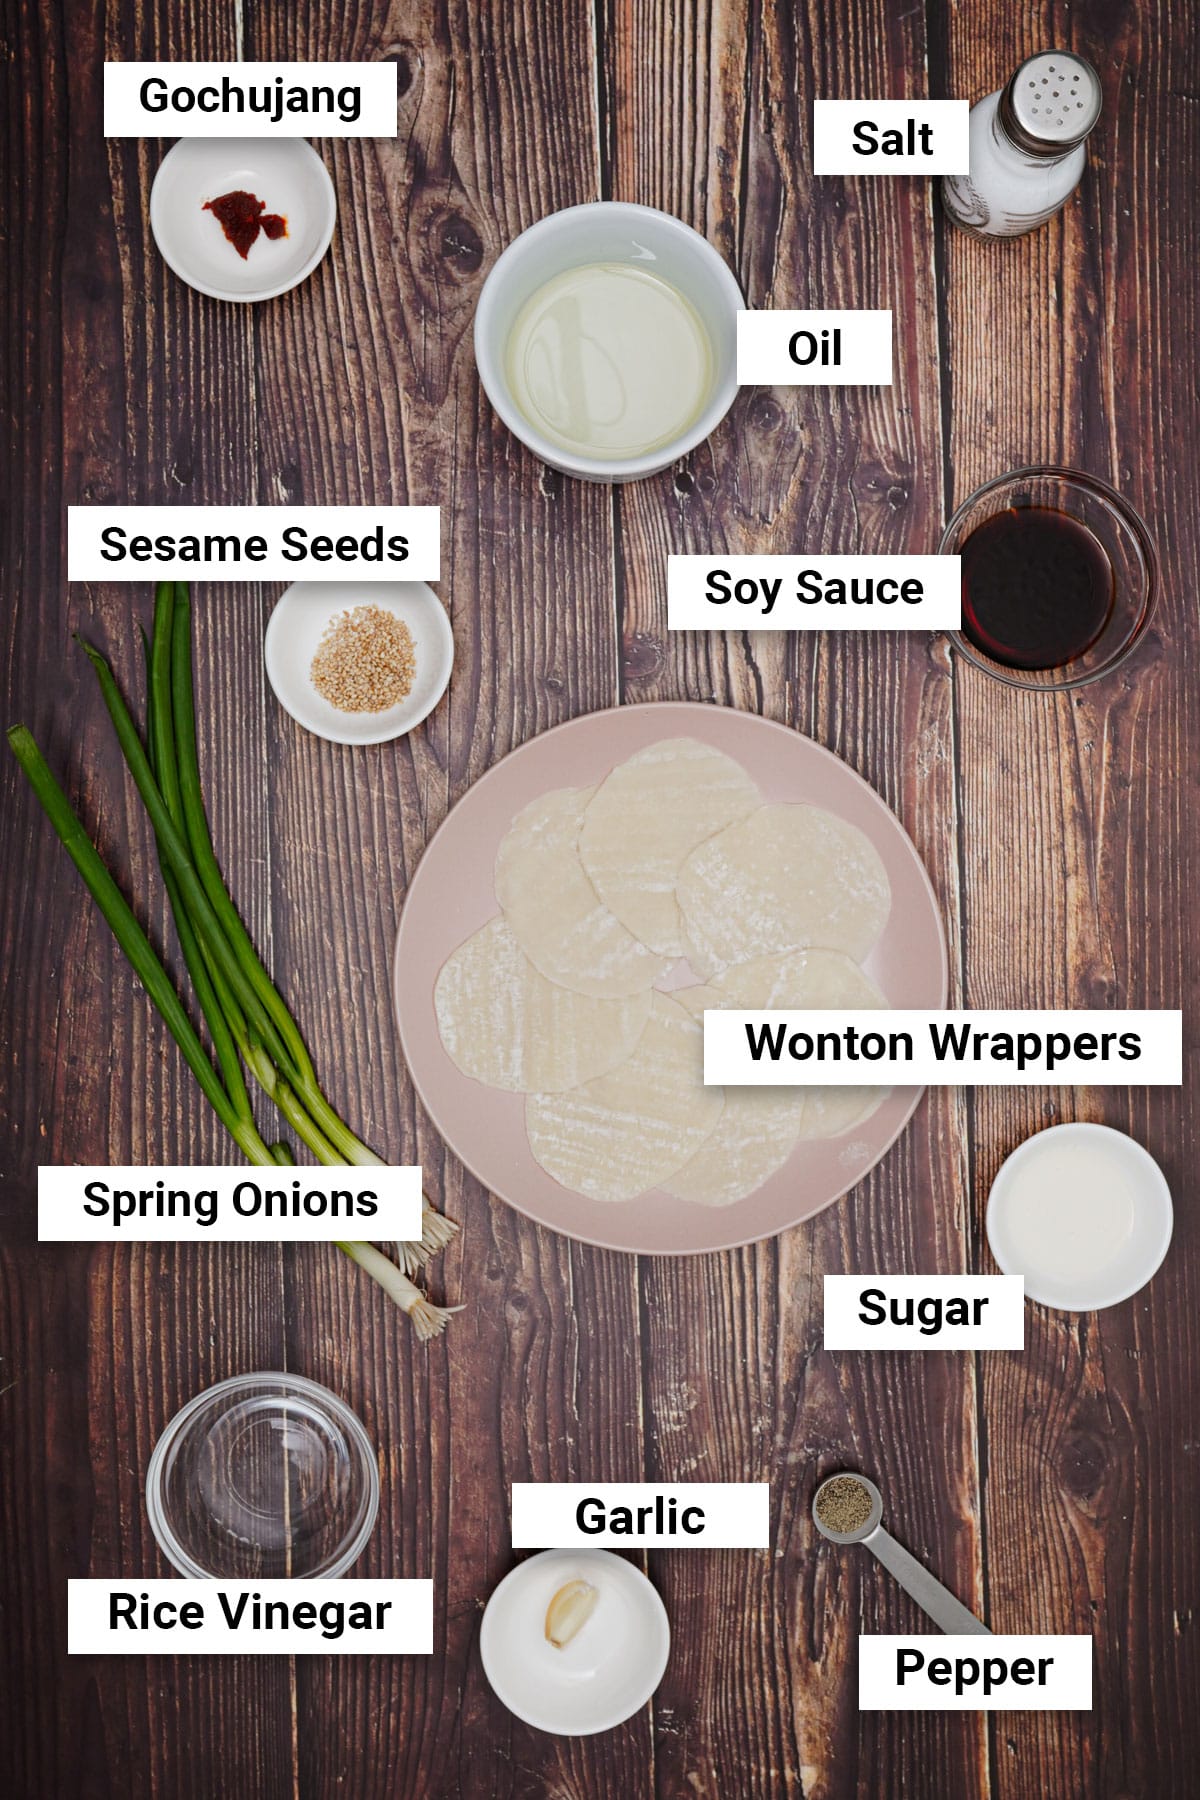 Ingredients for green onion pancakes recipe.